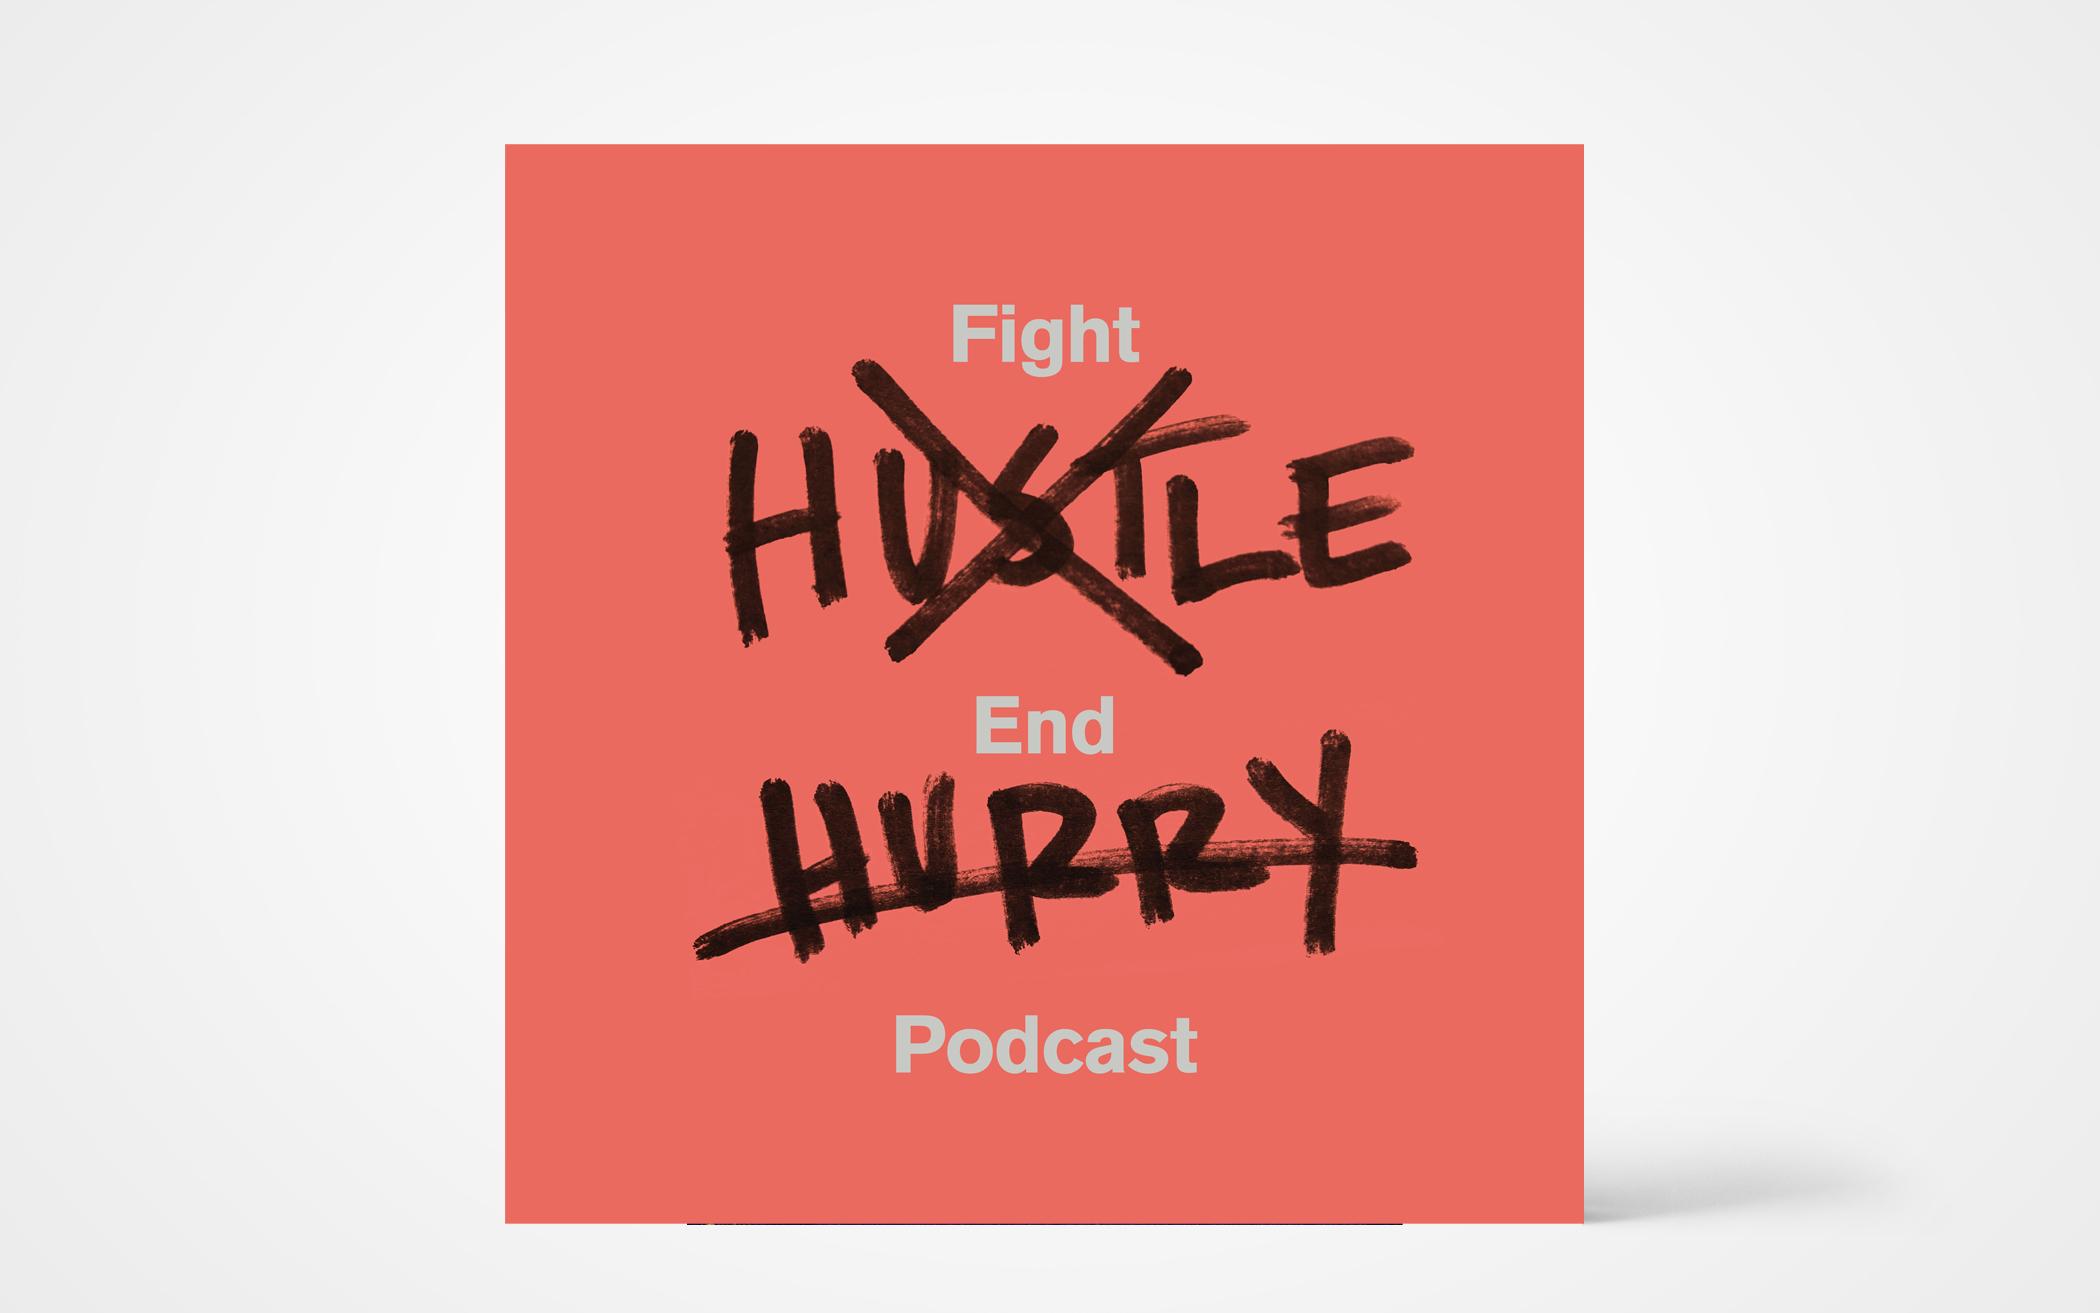 Fight Hustle, End Hurry podcast